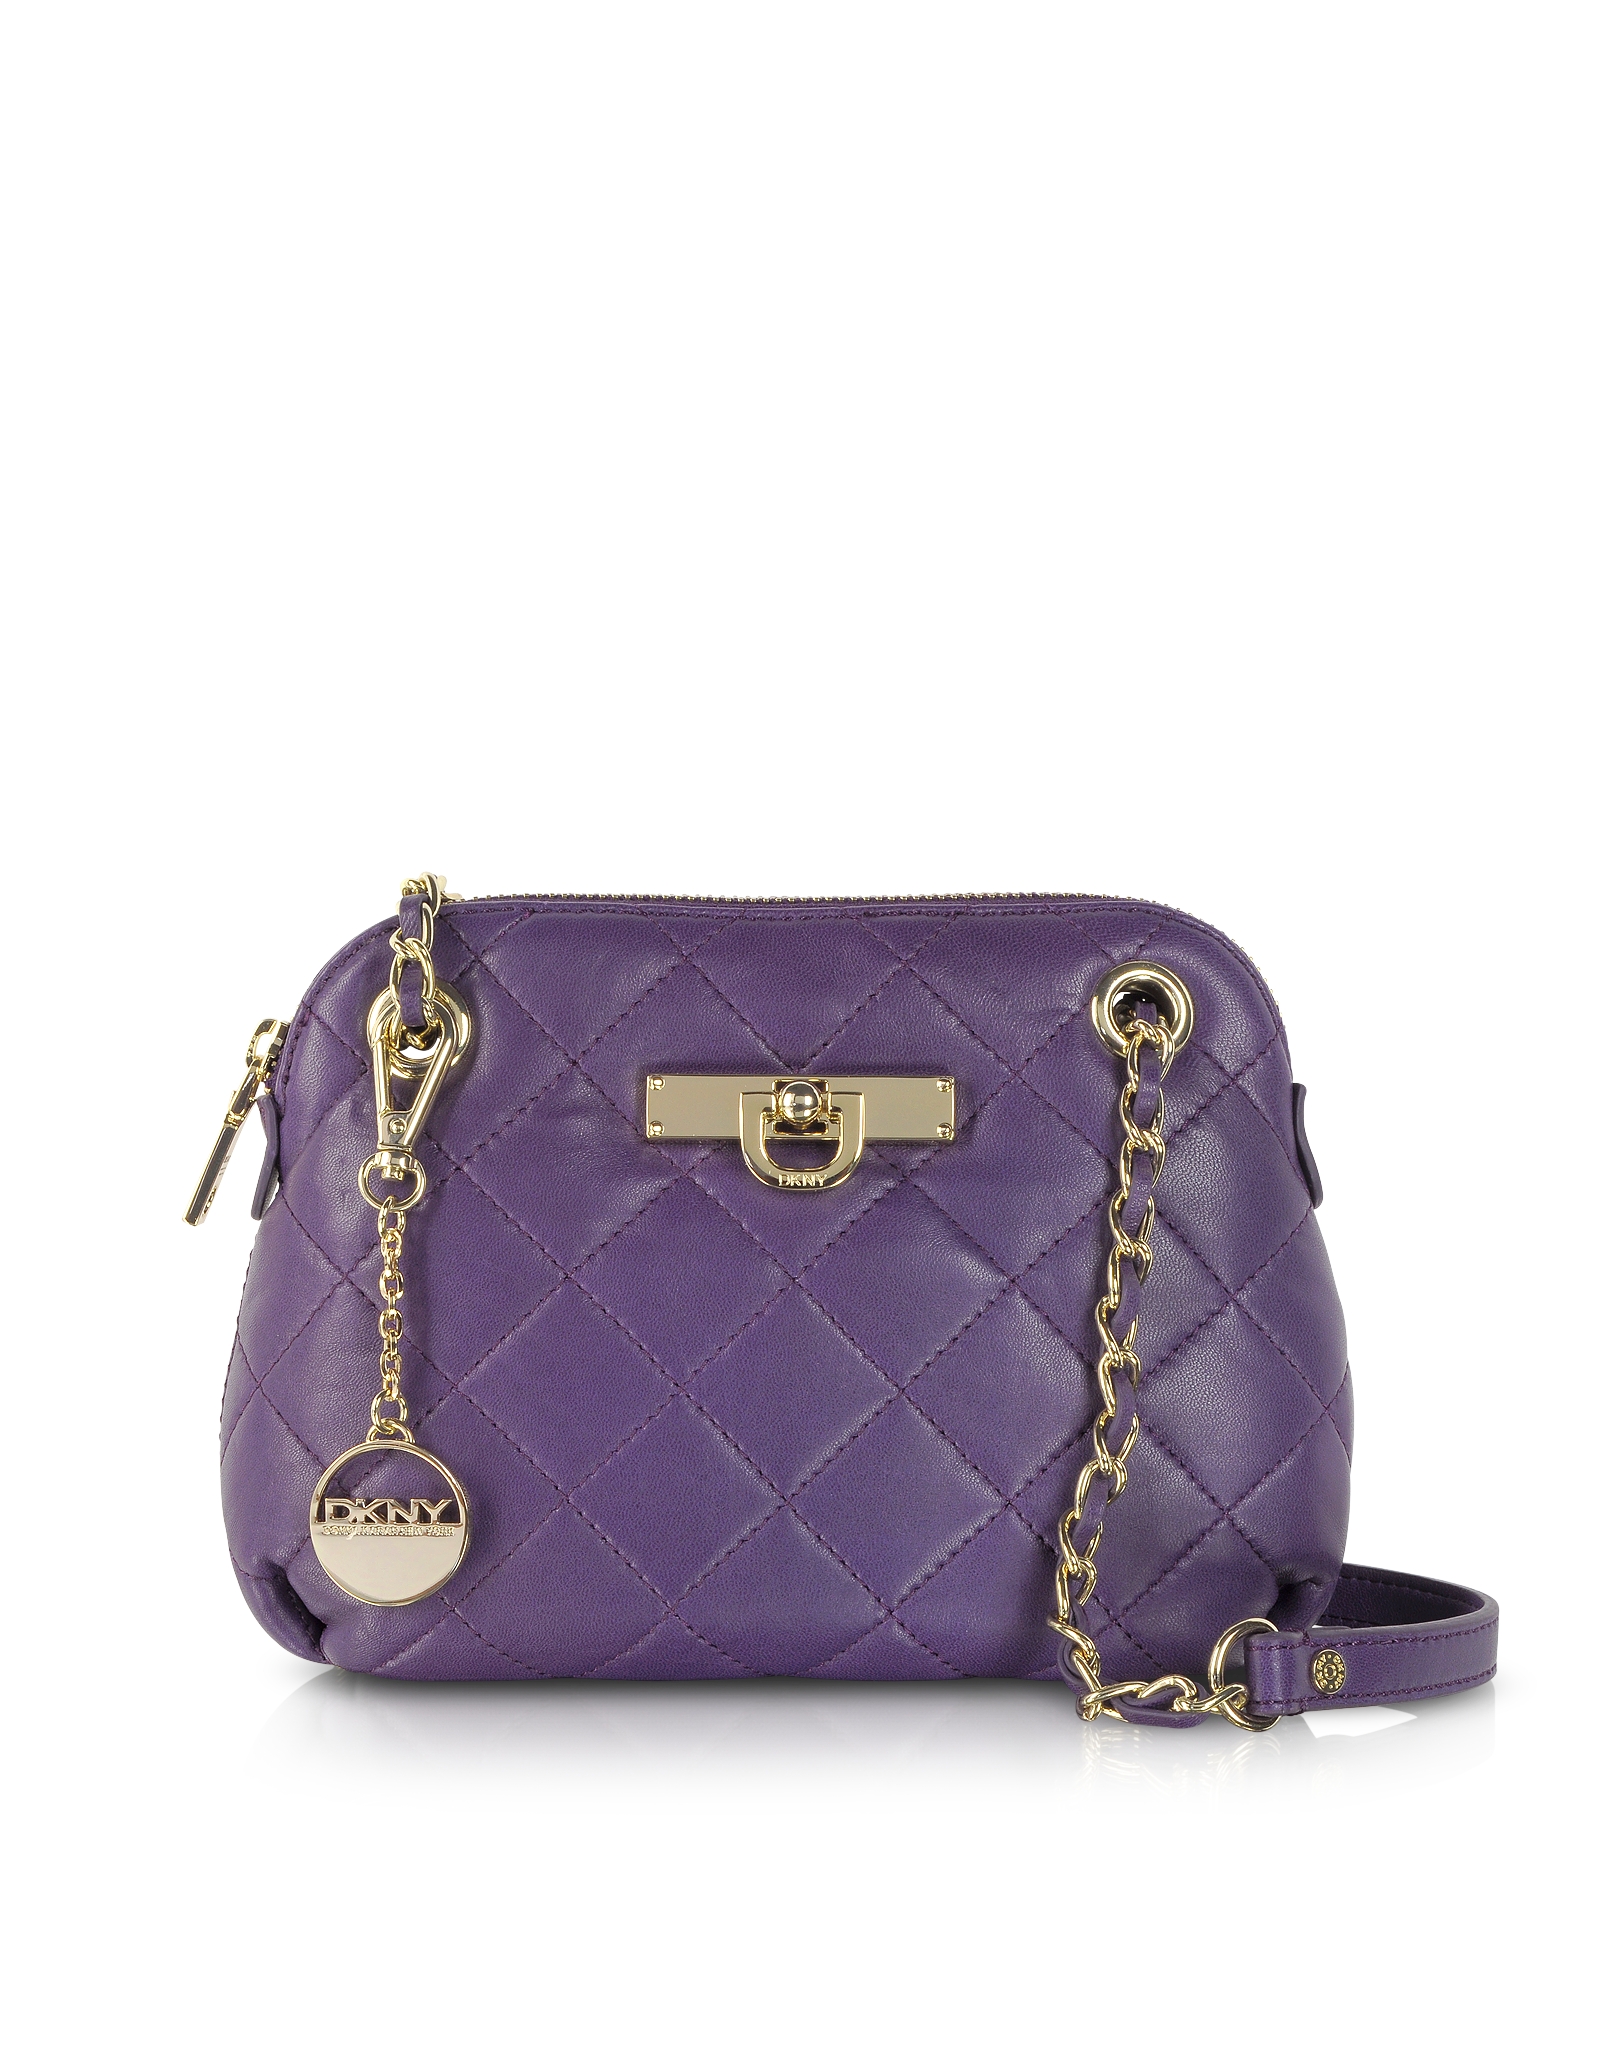 Lyst - DKNY Small Round Quilted Leather Crossbody Bag in Purple